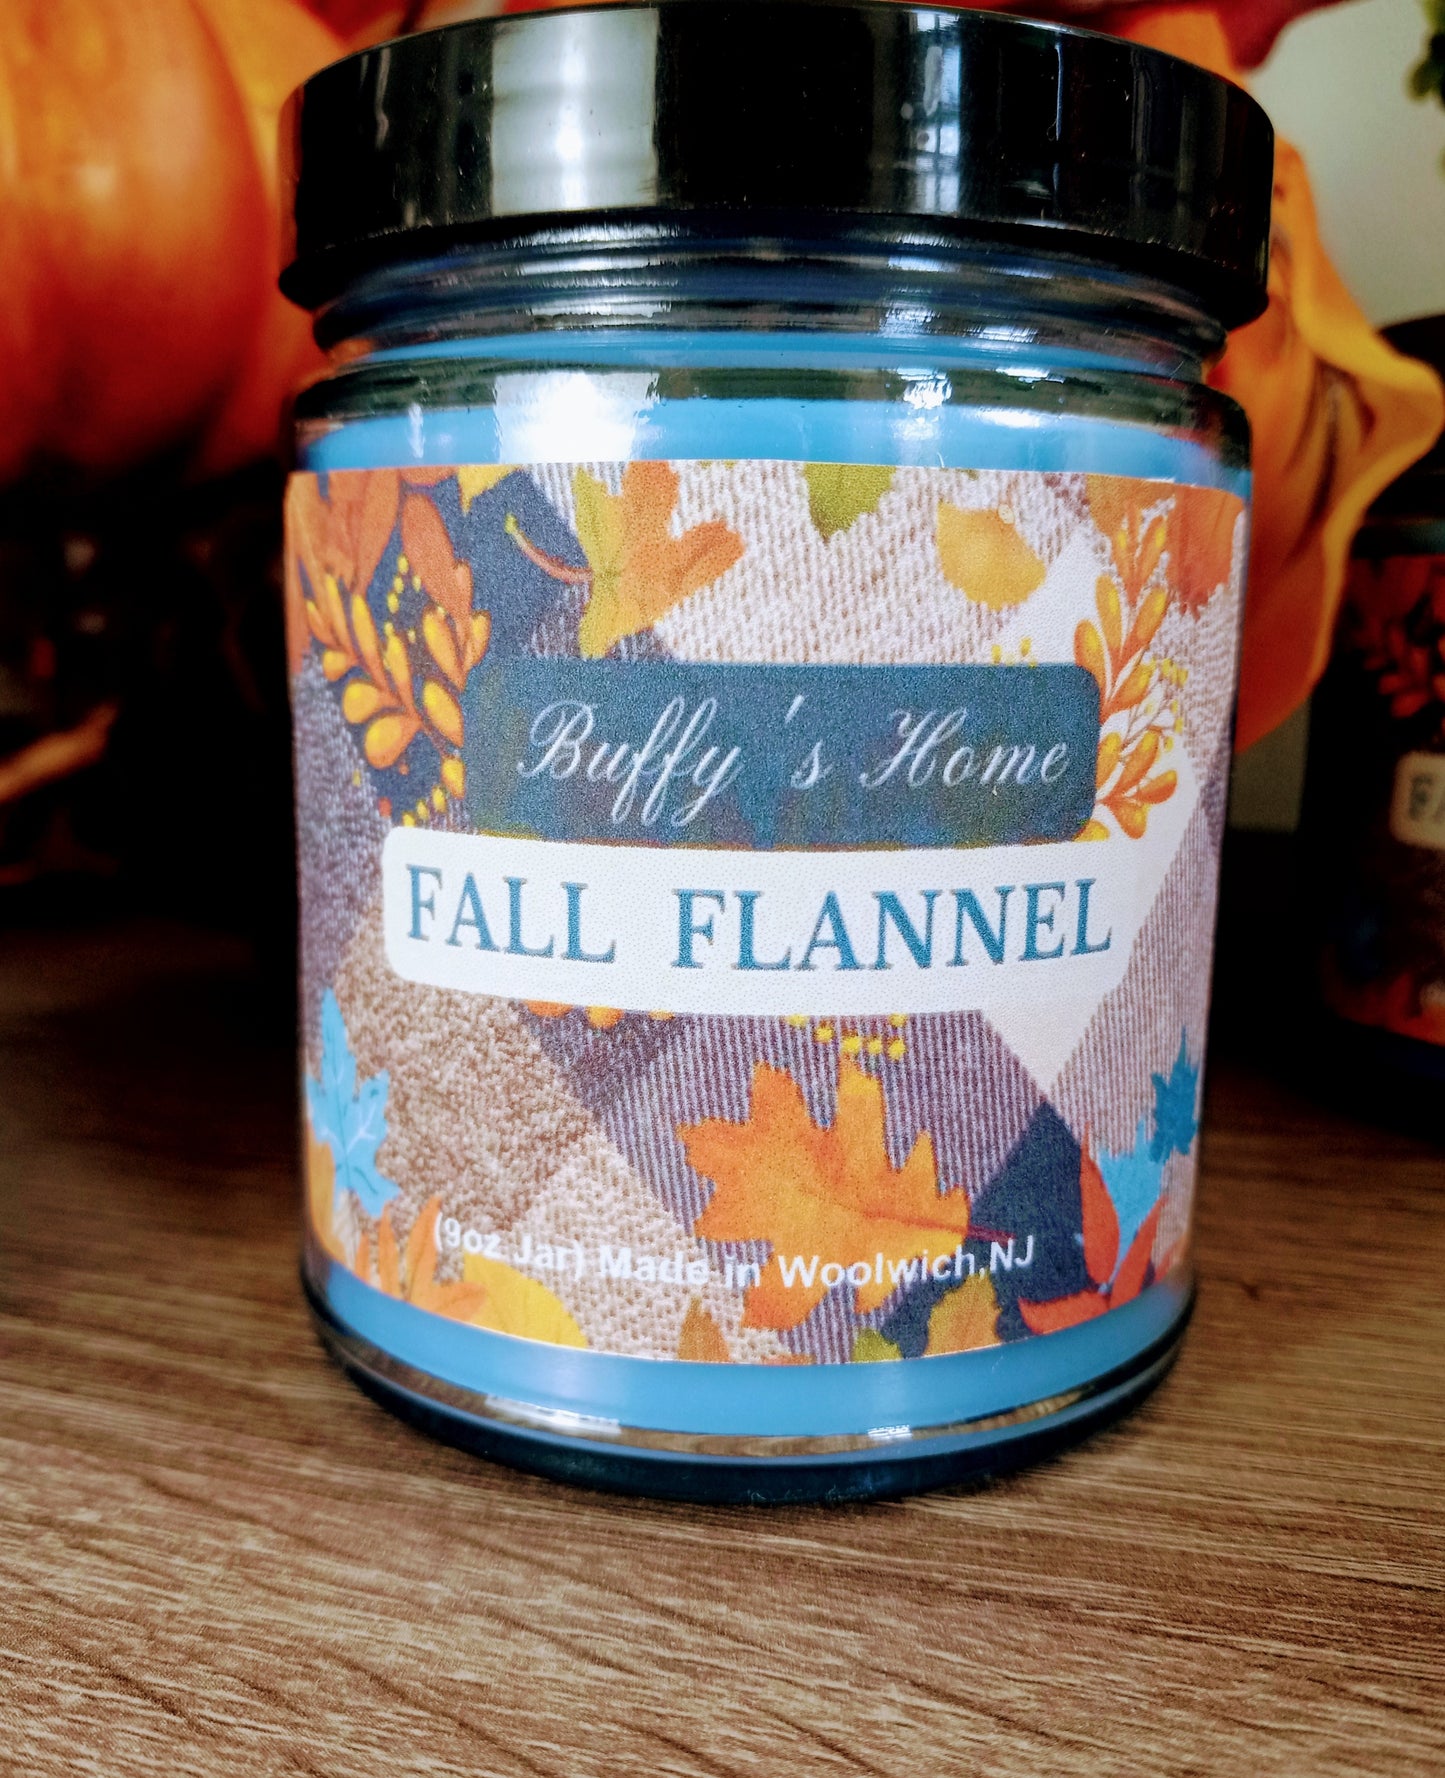 Fall Flannel (Fragrance Candles)